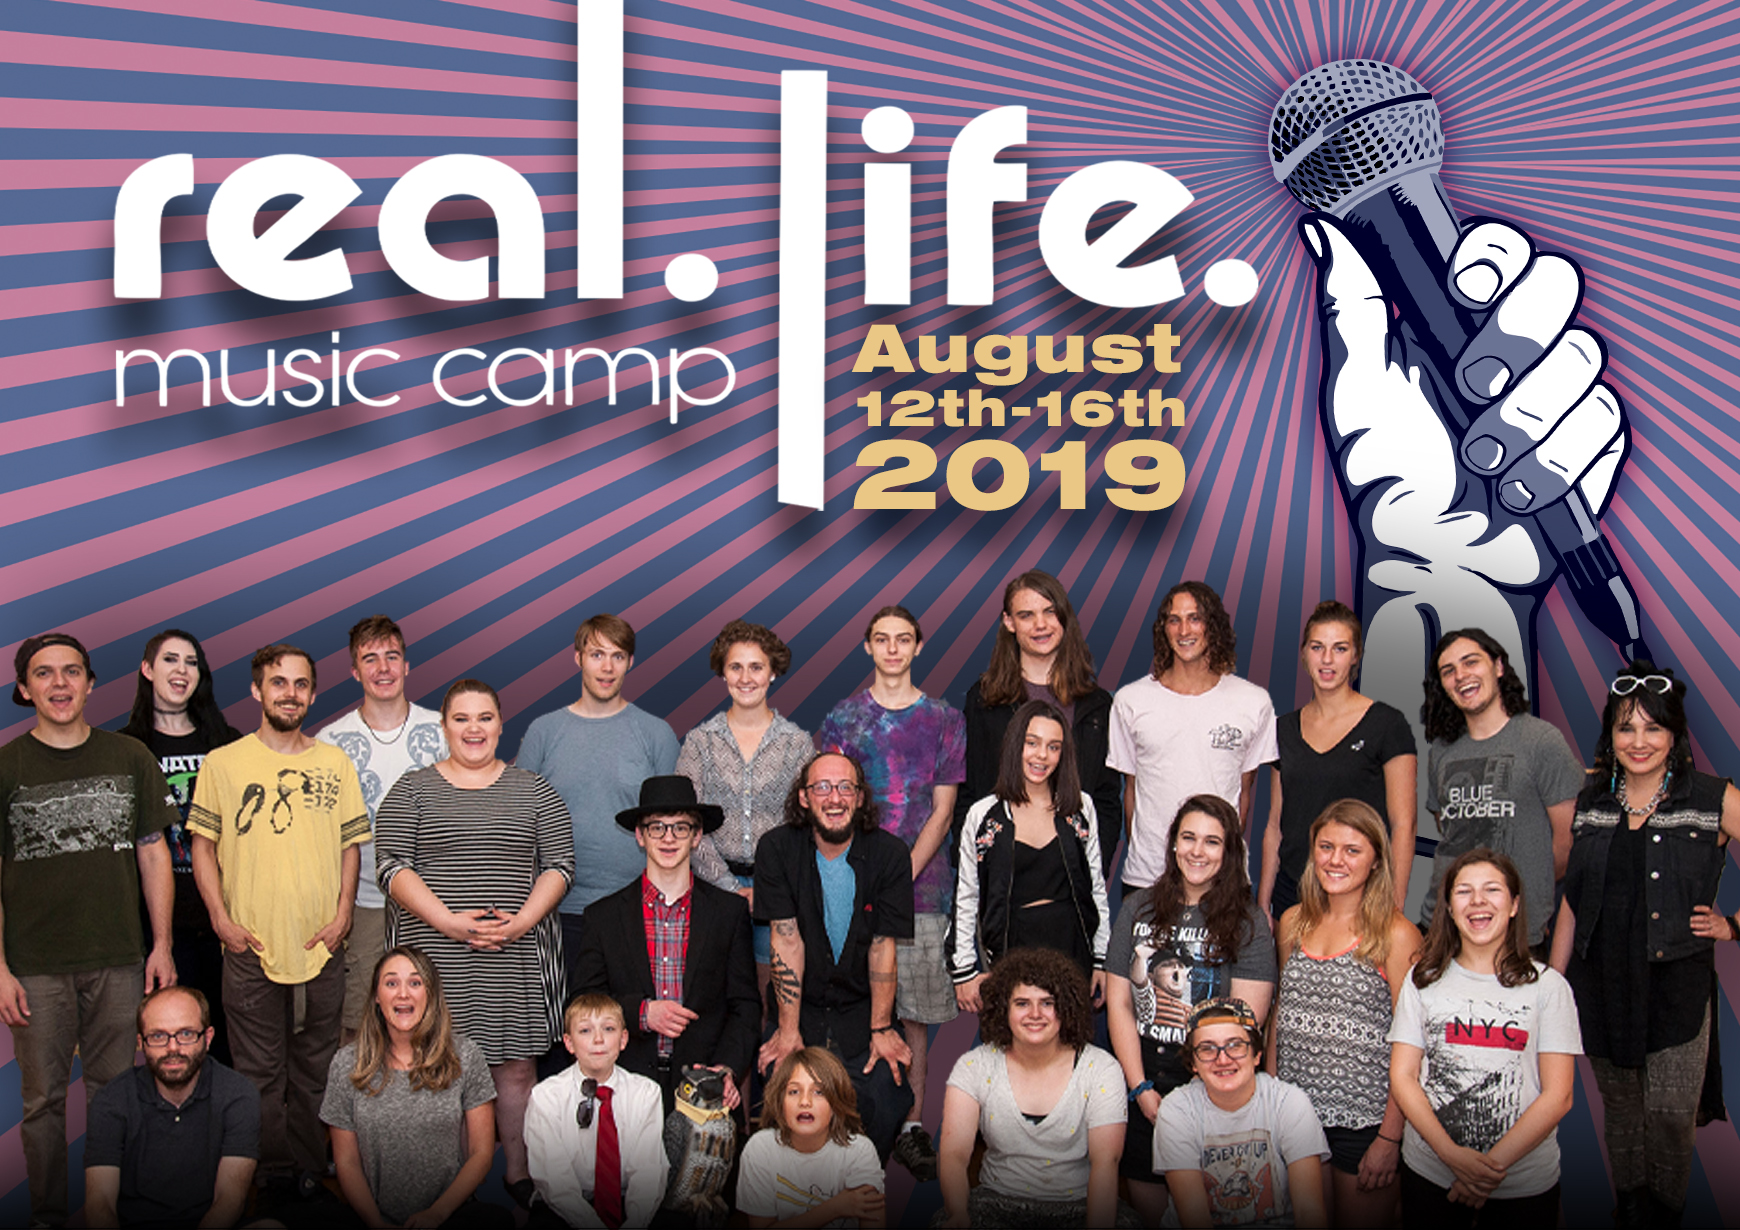 Real.Life.Music Camp